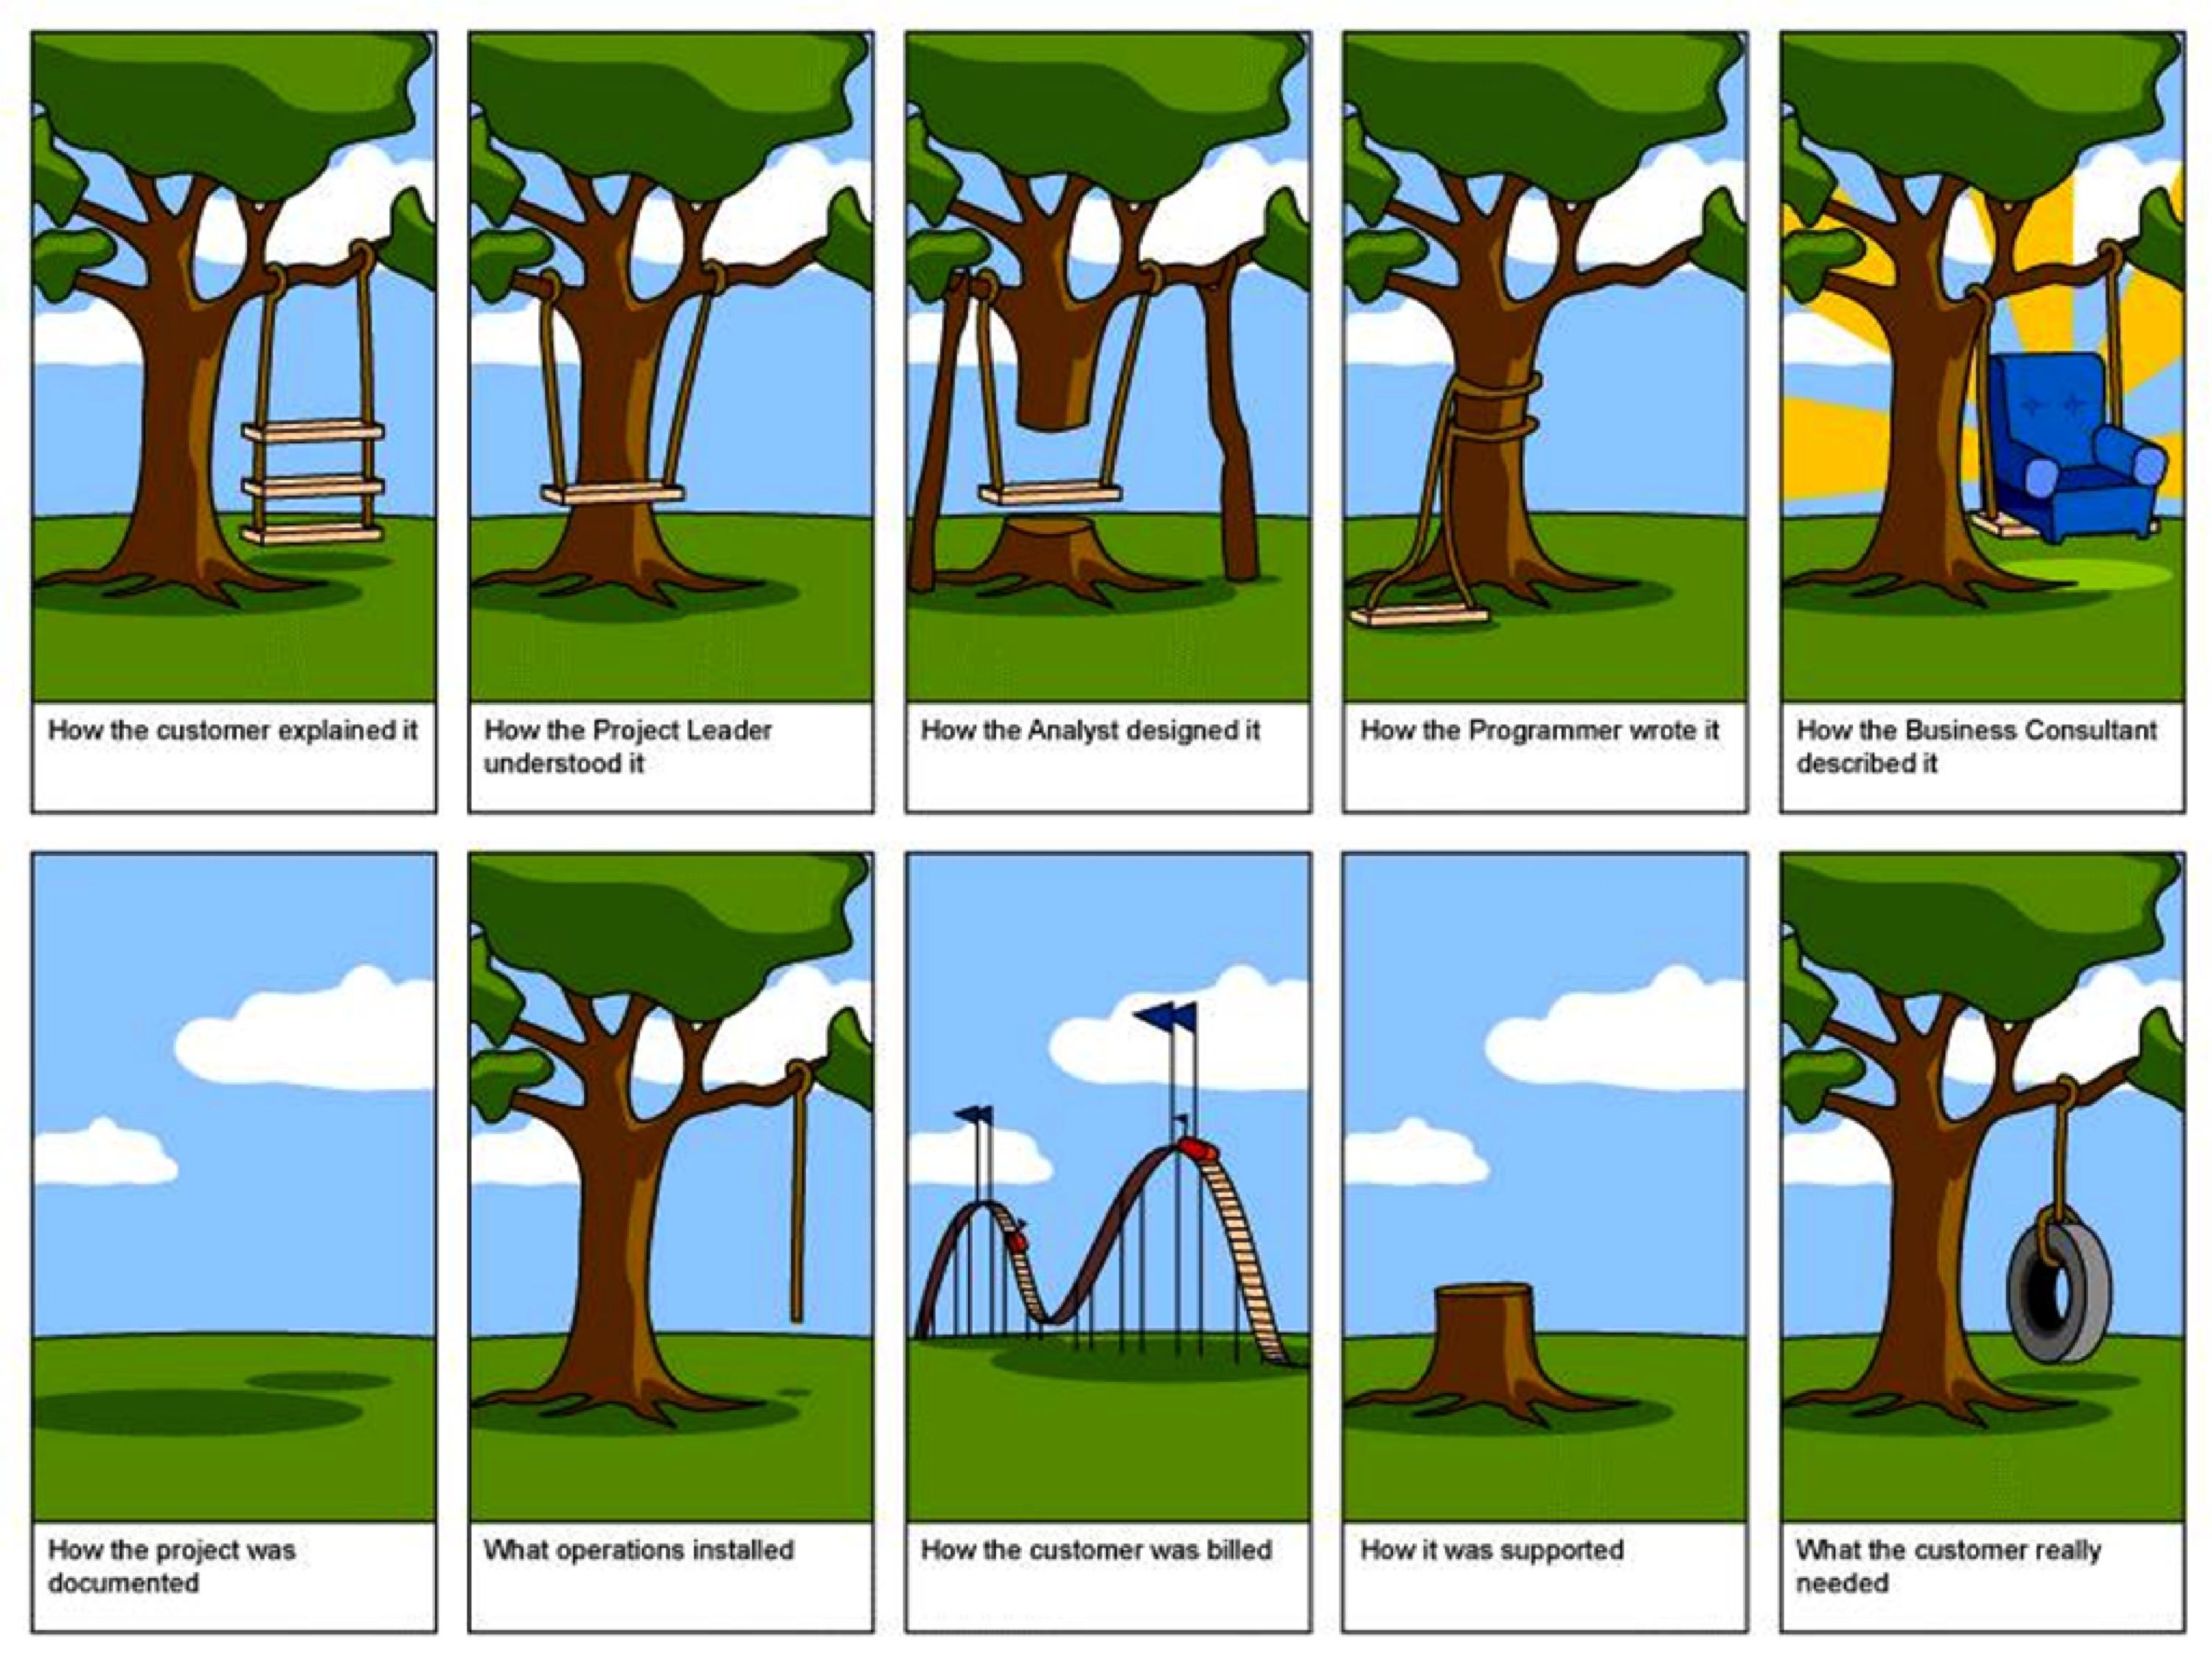 How the customer explained it
How the project leader understood it
How the analyst designed it
How the programmer wrote it
How the business consultant described it
How the project was documented
What operations installed
How the customer was billed
How it was supported
What the customer really needed  Wisdom Funny Project Management Quote